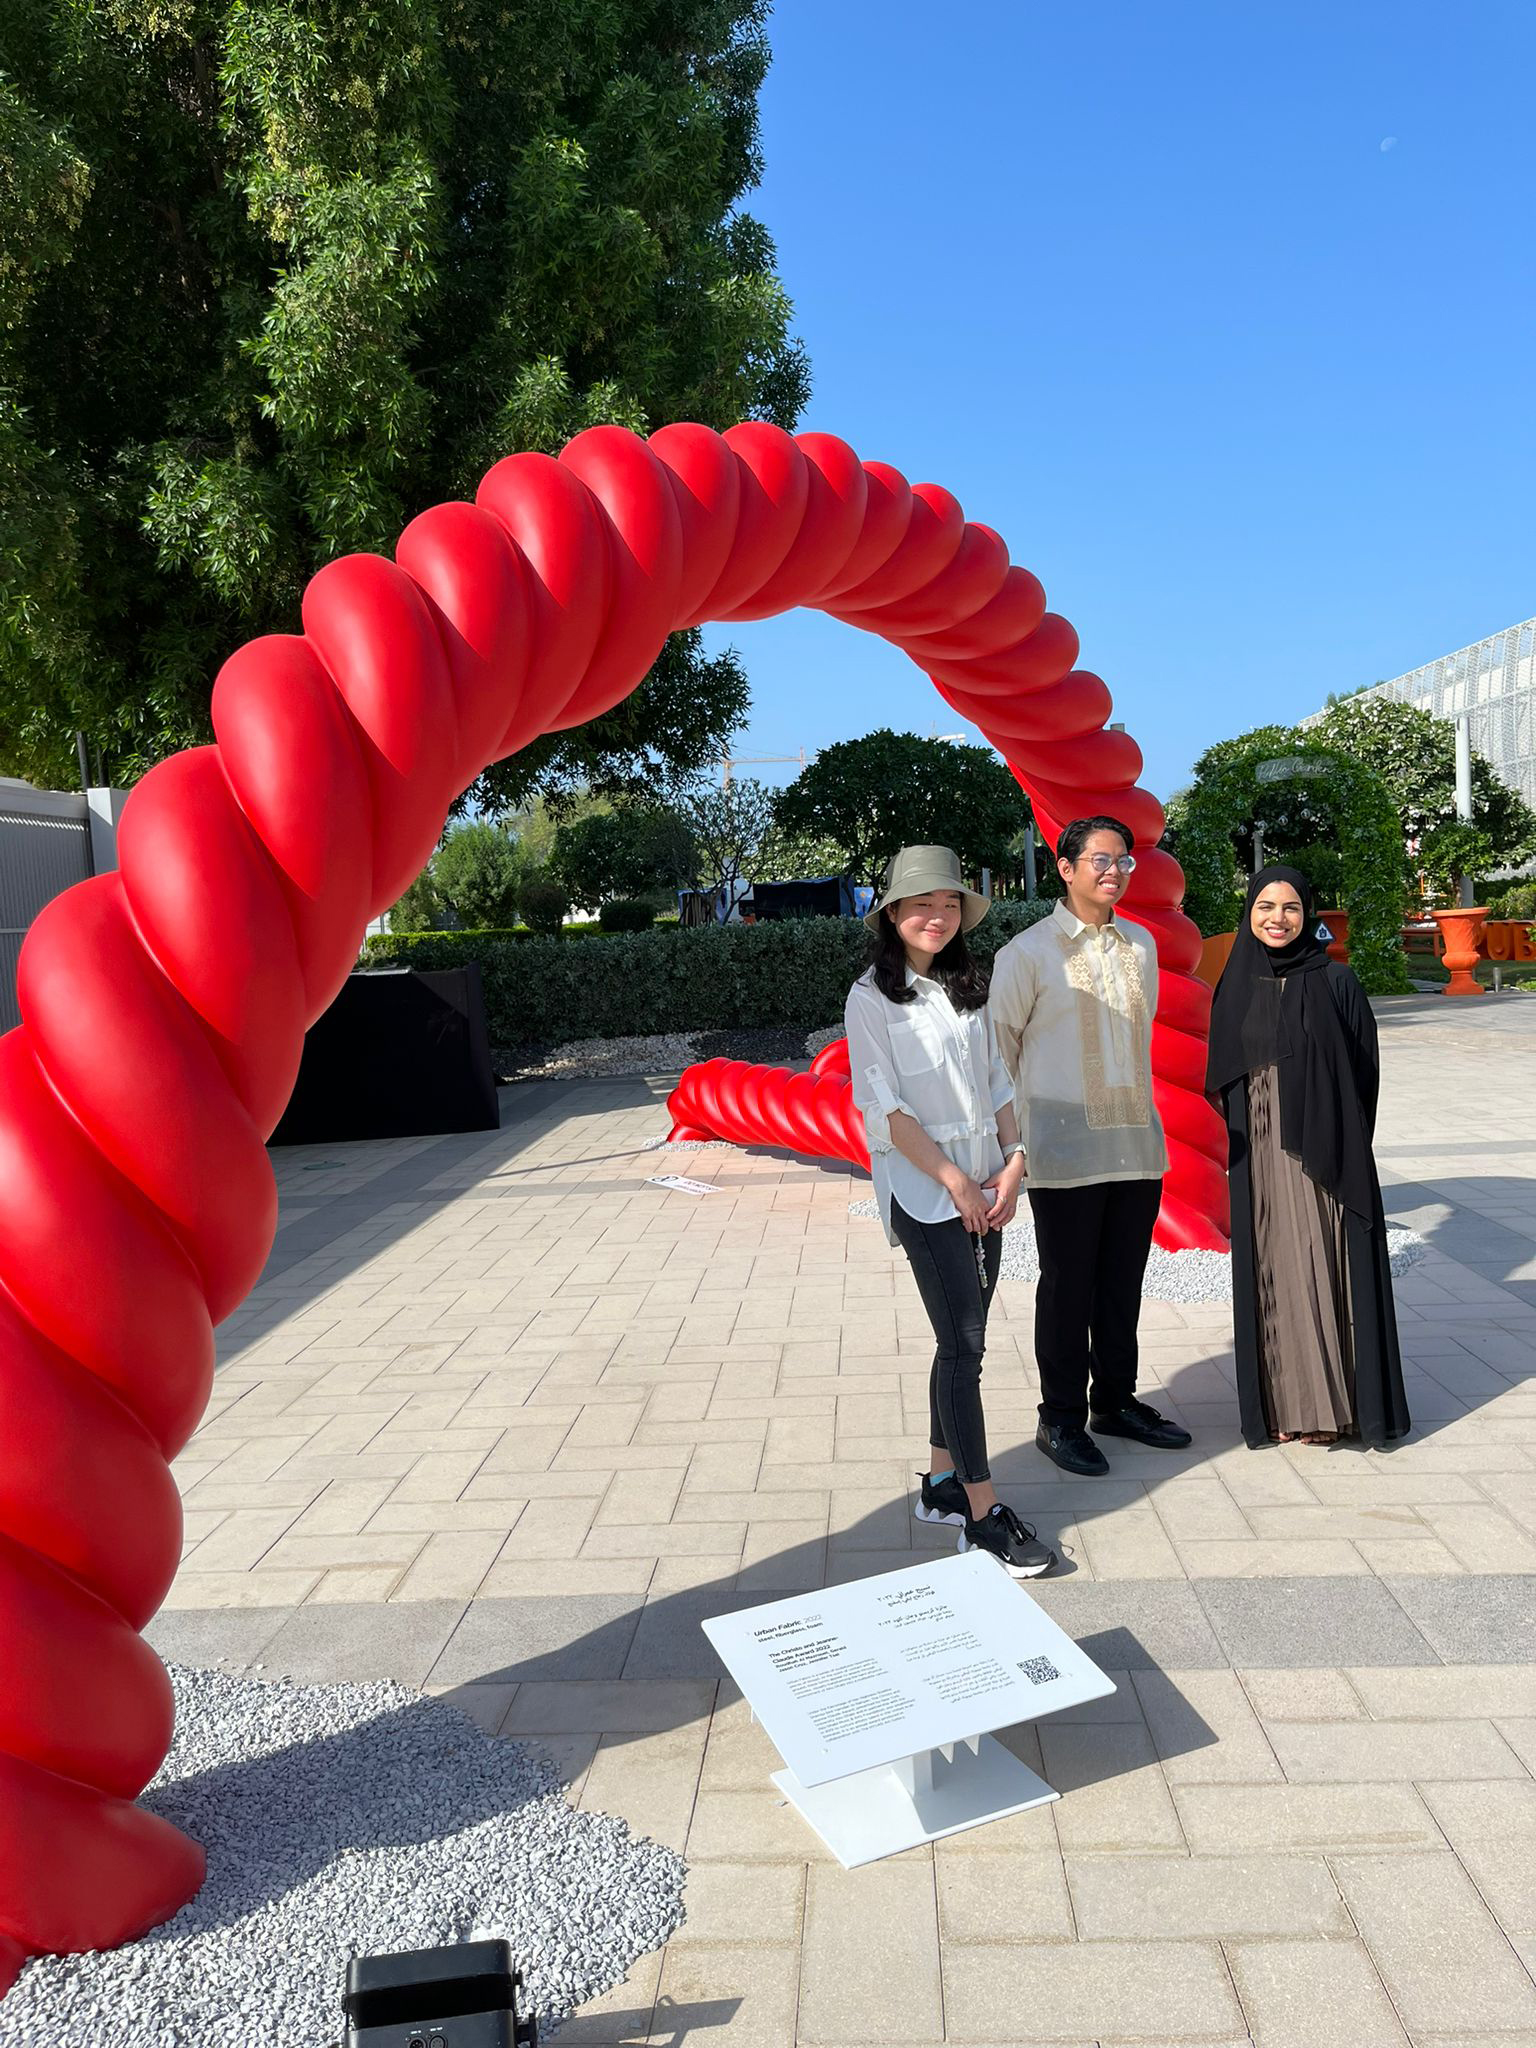 Students in front of their winning installation, “Urban Fabric.” The work is a large red braid-like sculpture curved into an arch.